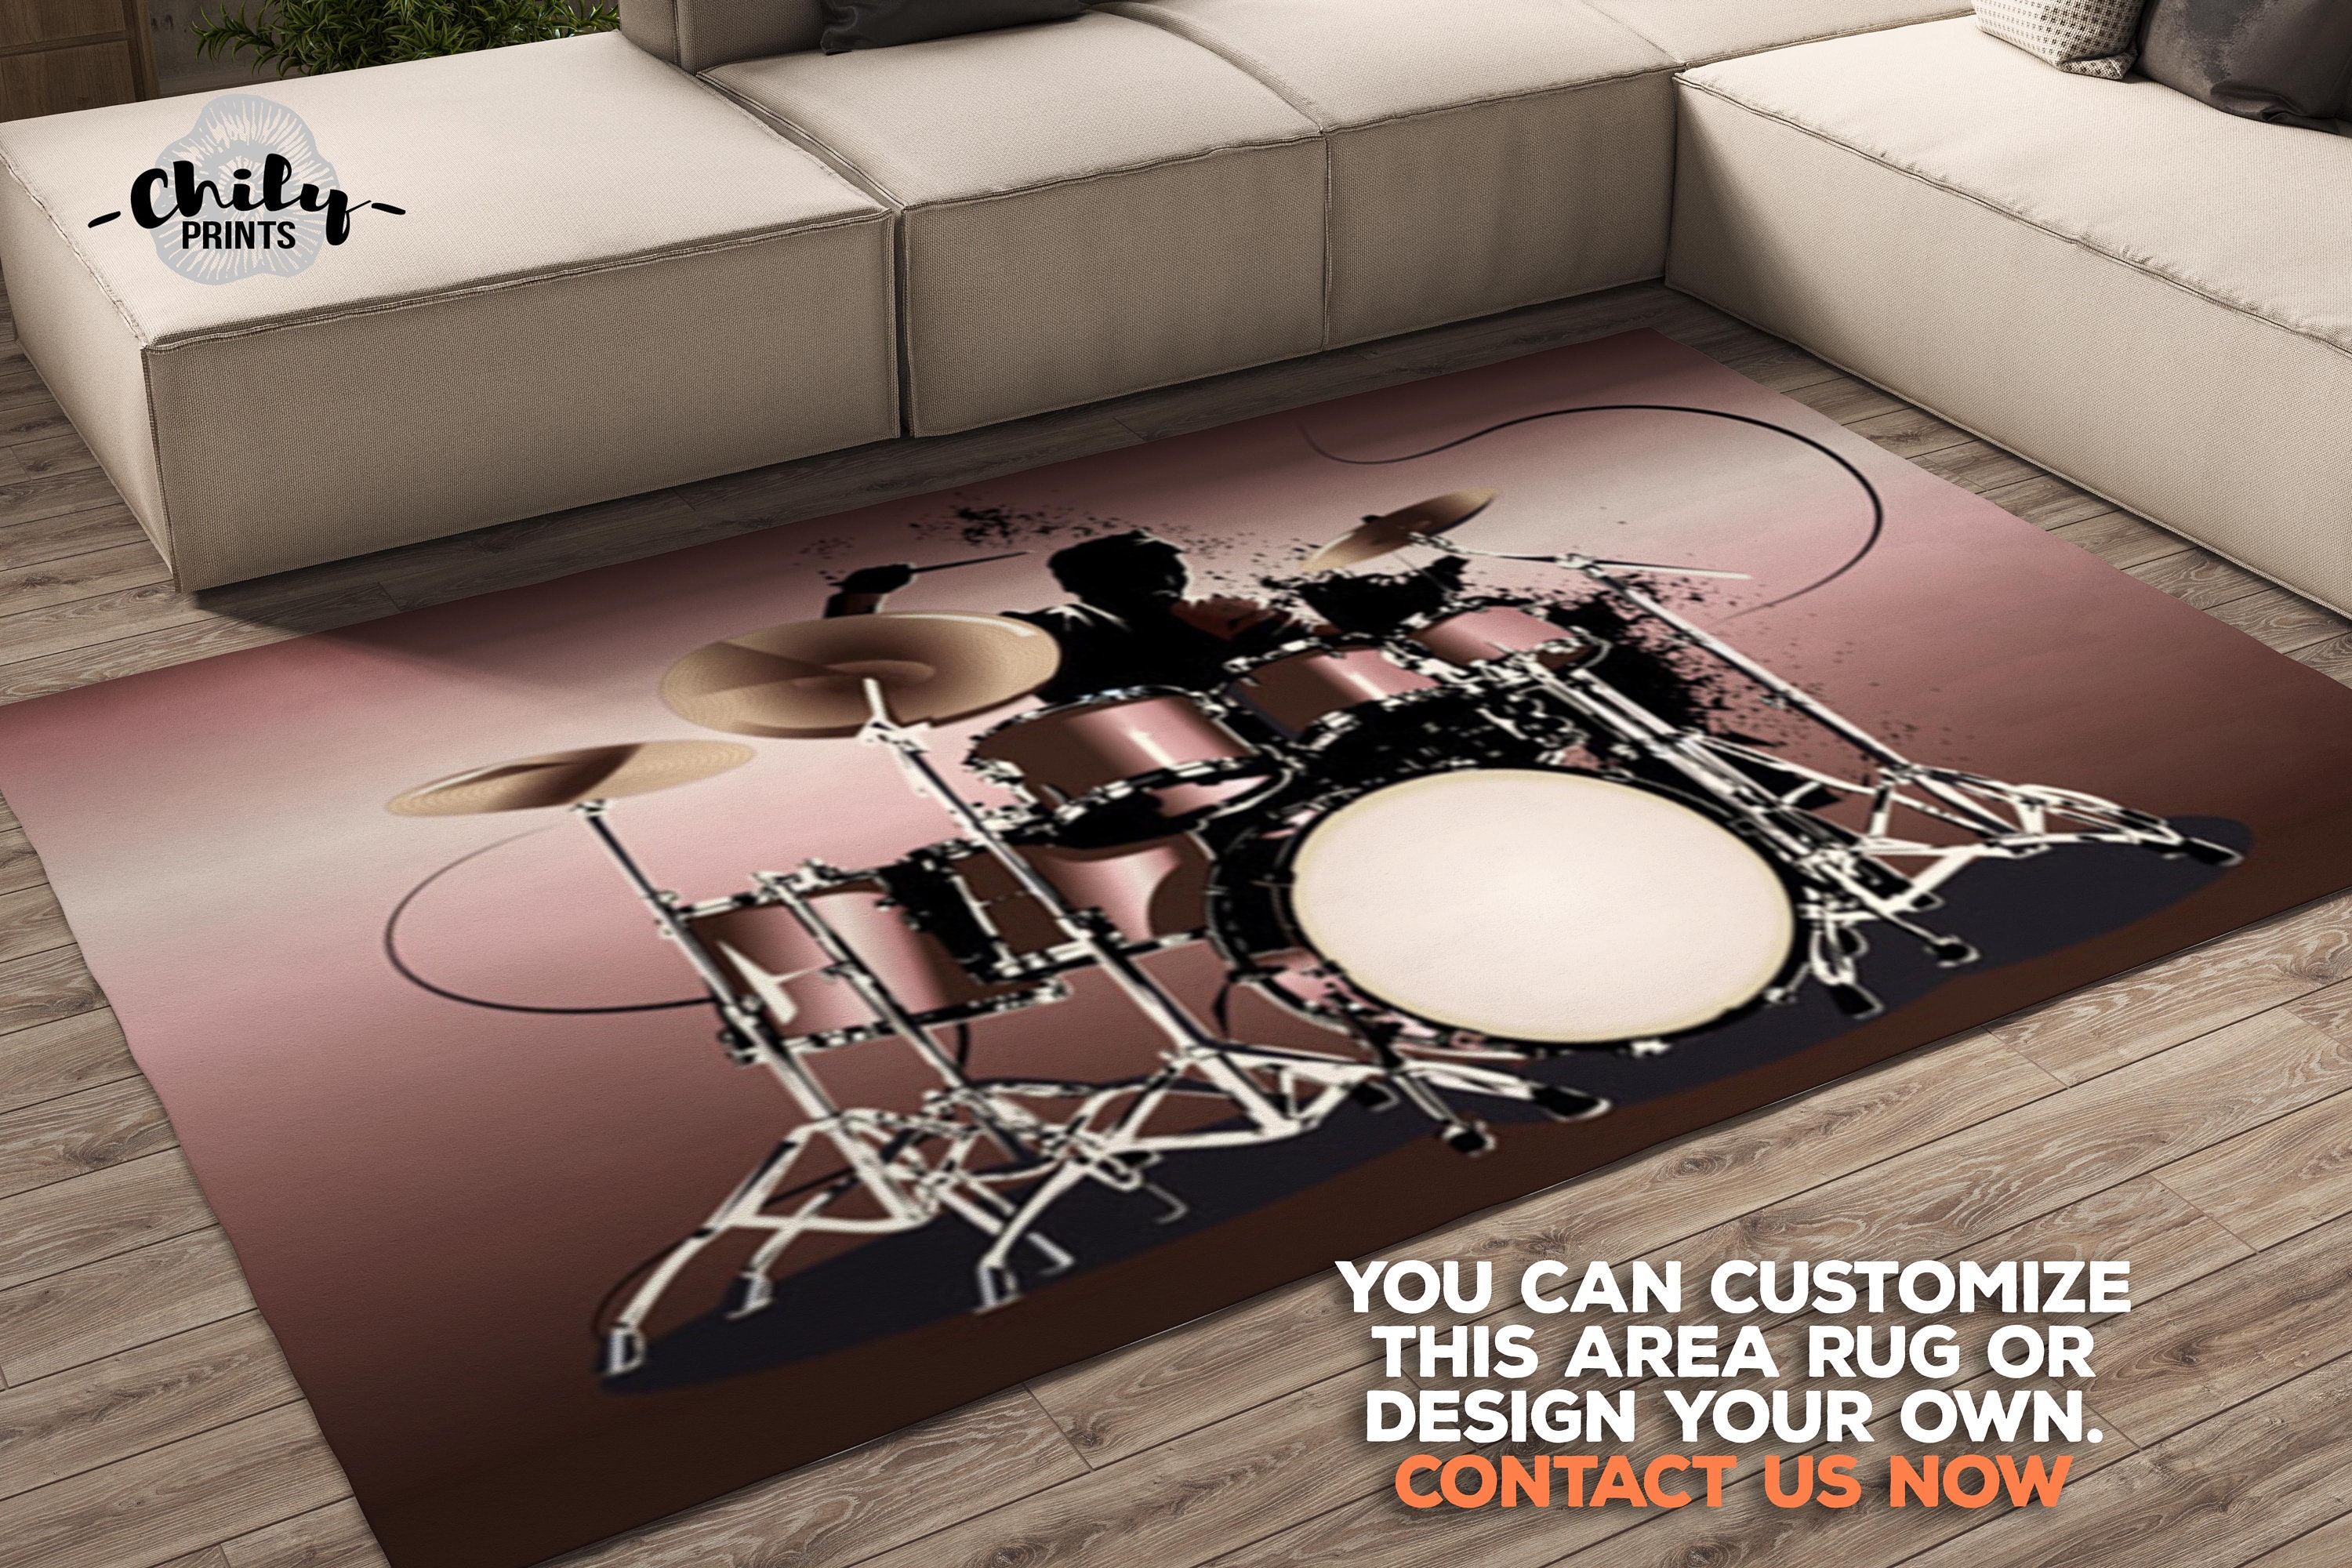 Drum Rug, Drum Mat, Electrical Drum Carpet Soundproof Rug Pads Drum  Accessories for Electric Drums Jazz Drum Set, Gift for Drummers, Drum  Accessories, 47 x 63 